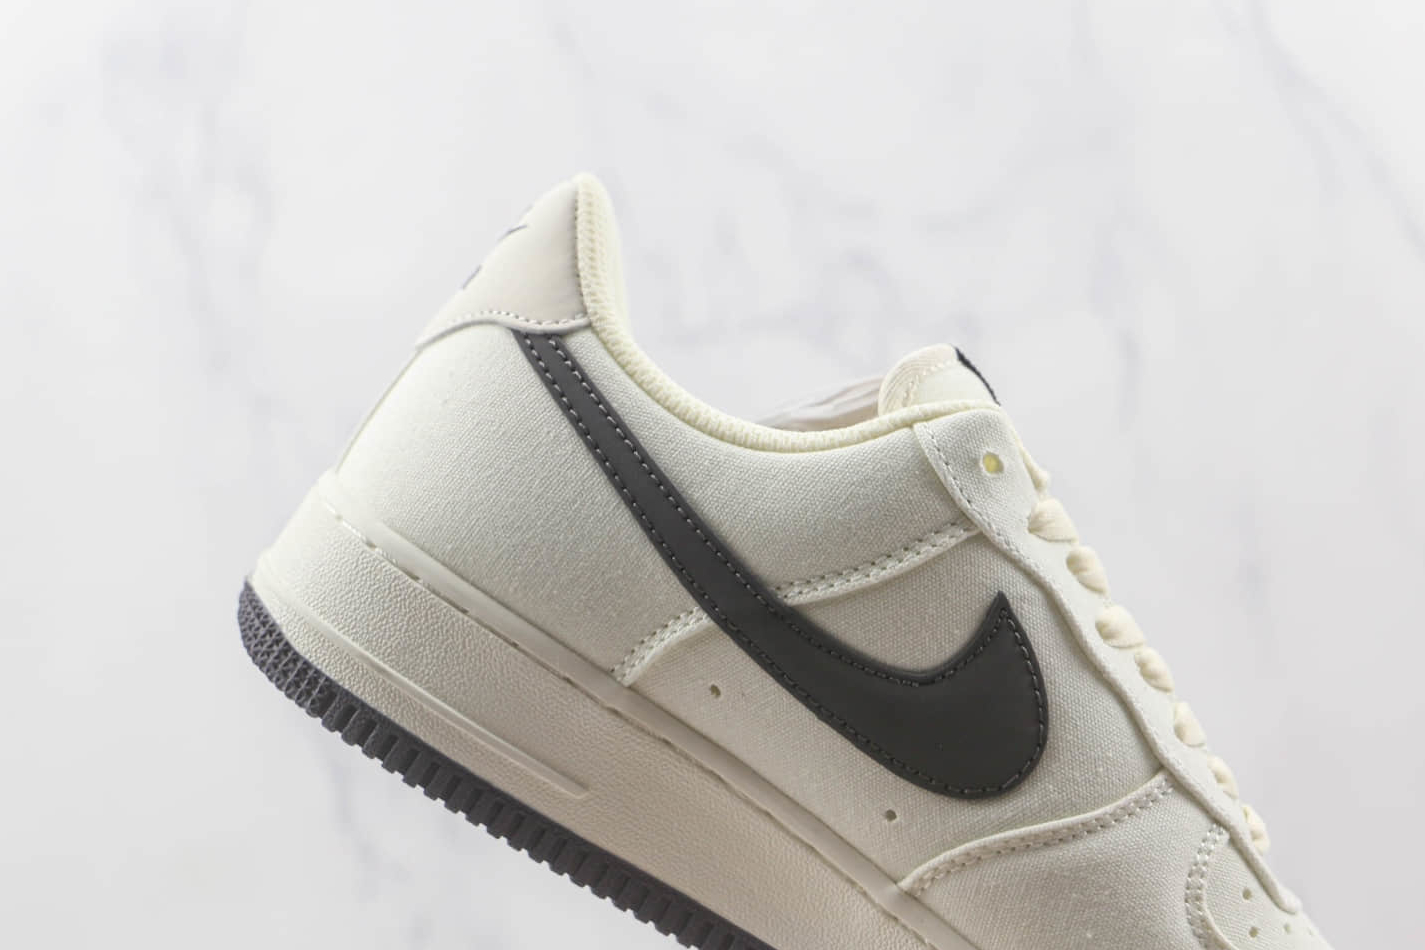 Nike Air Force 1 Low Rice White Black Dark Grey DG2296-007 - Iconic Style and Versatility